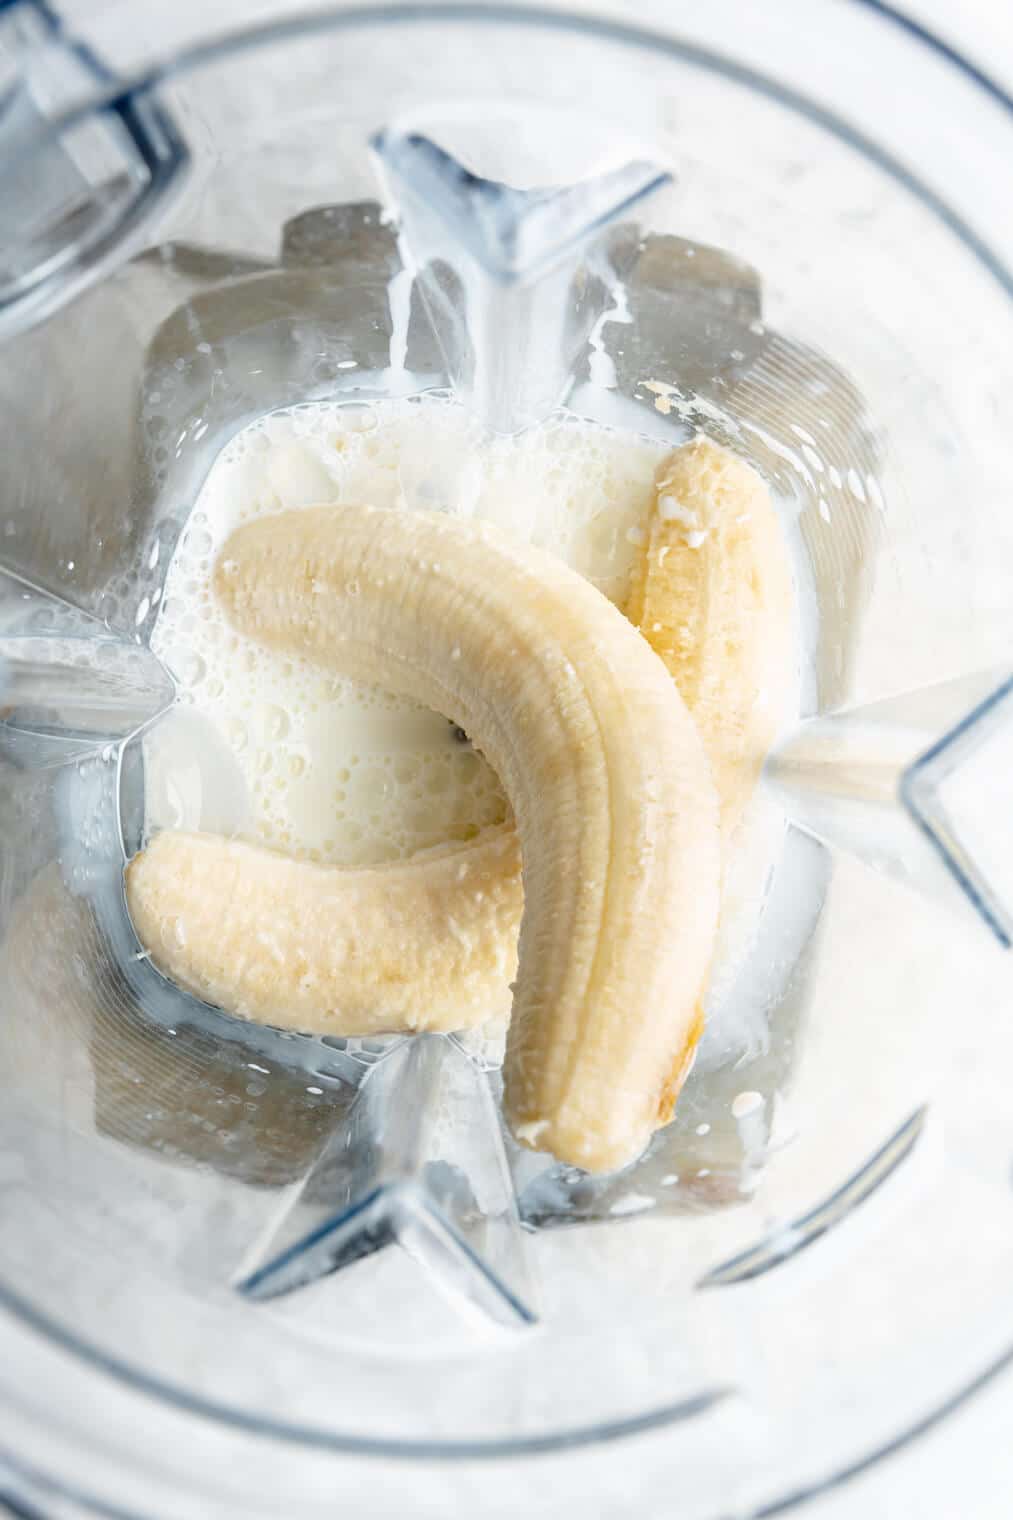 Two bananas and milk in a blender.